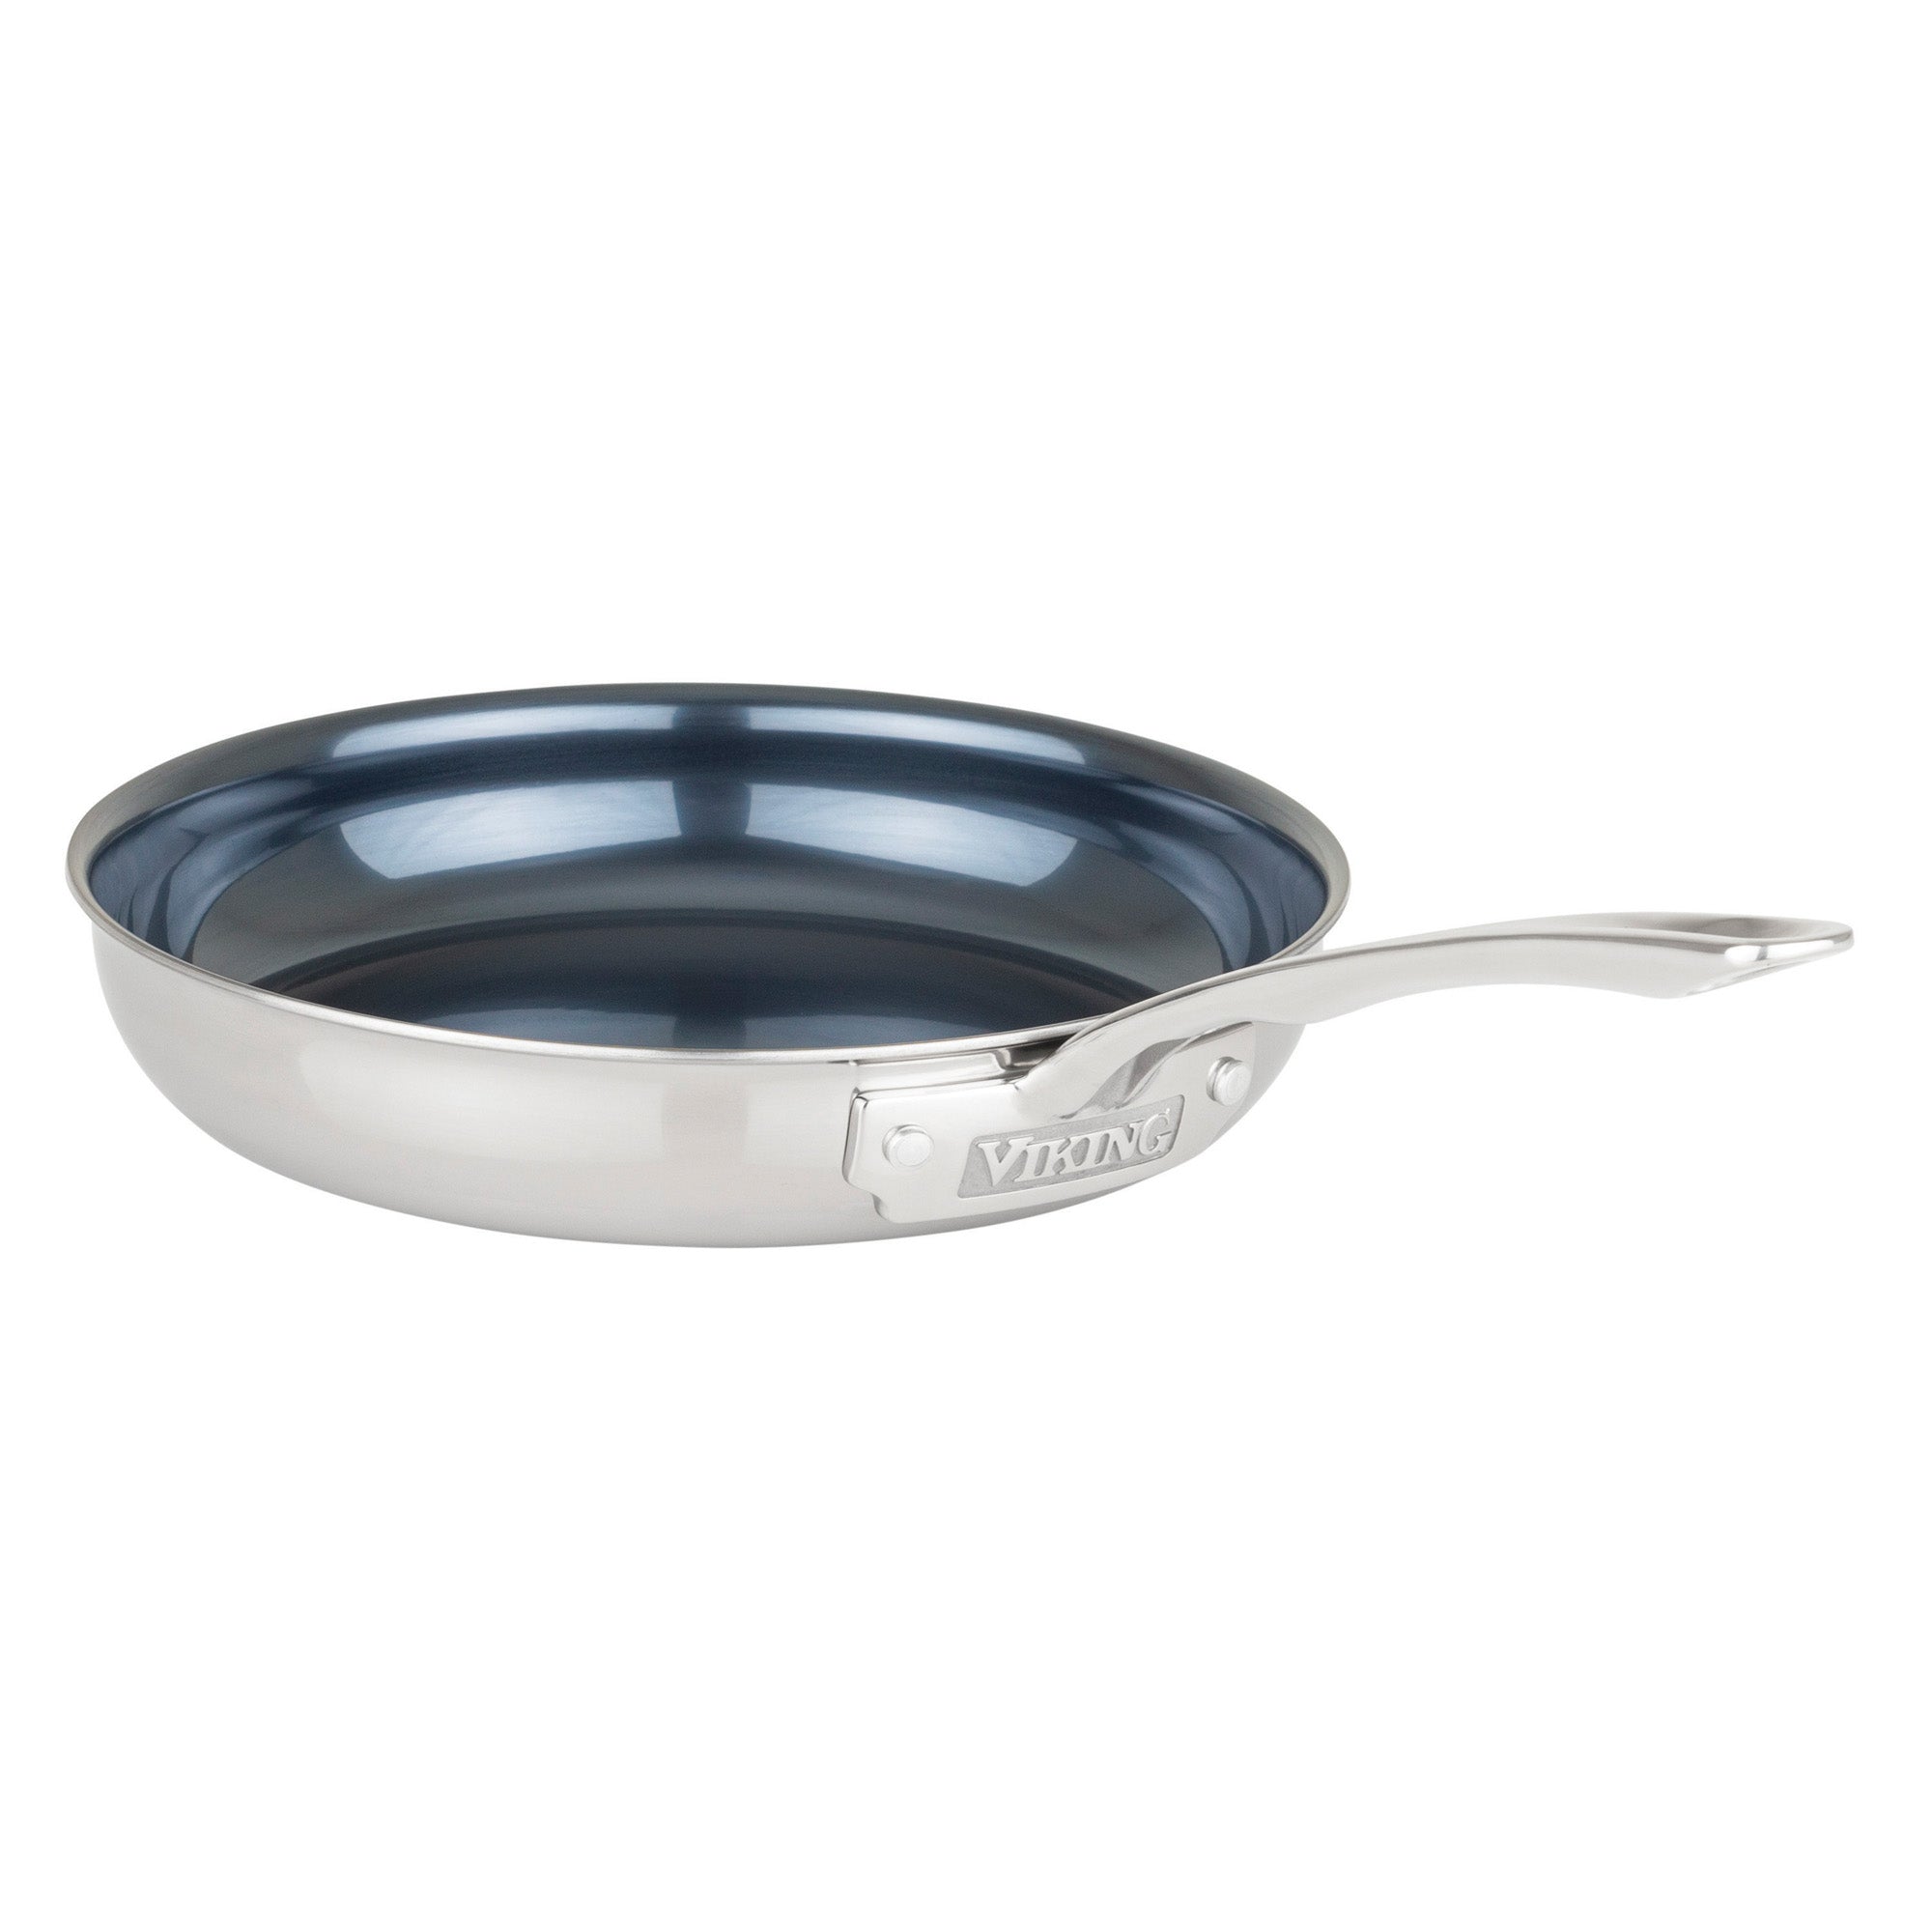 Our Table™ Forged Aluminum Ceramic Nonstick Fry Pan Set, 2 Piece